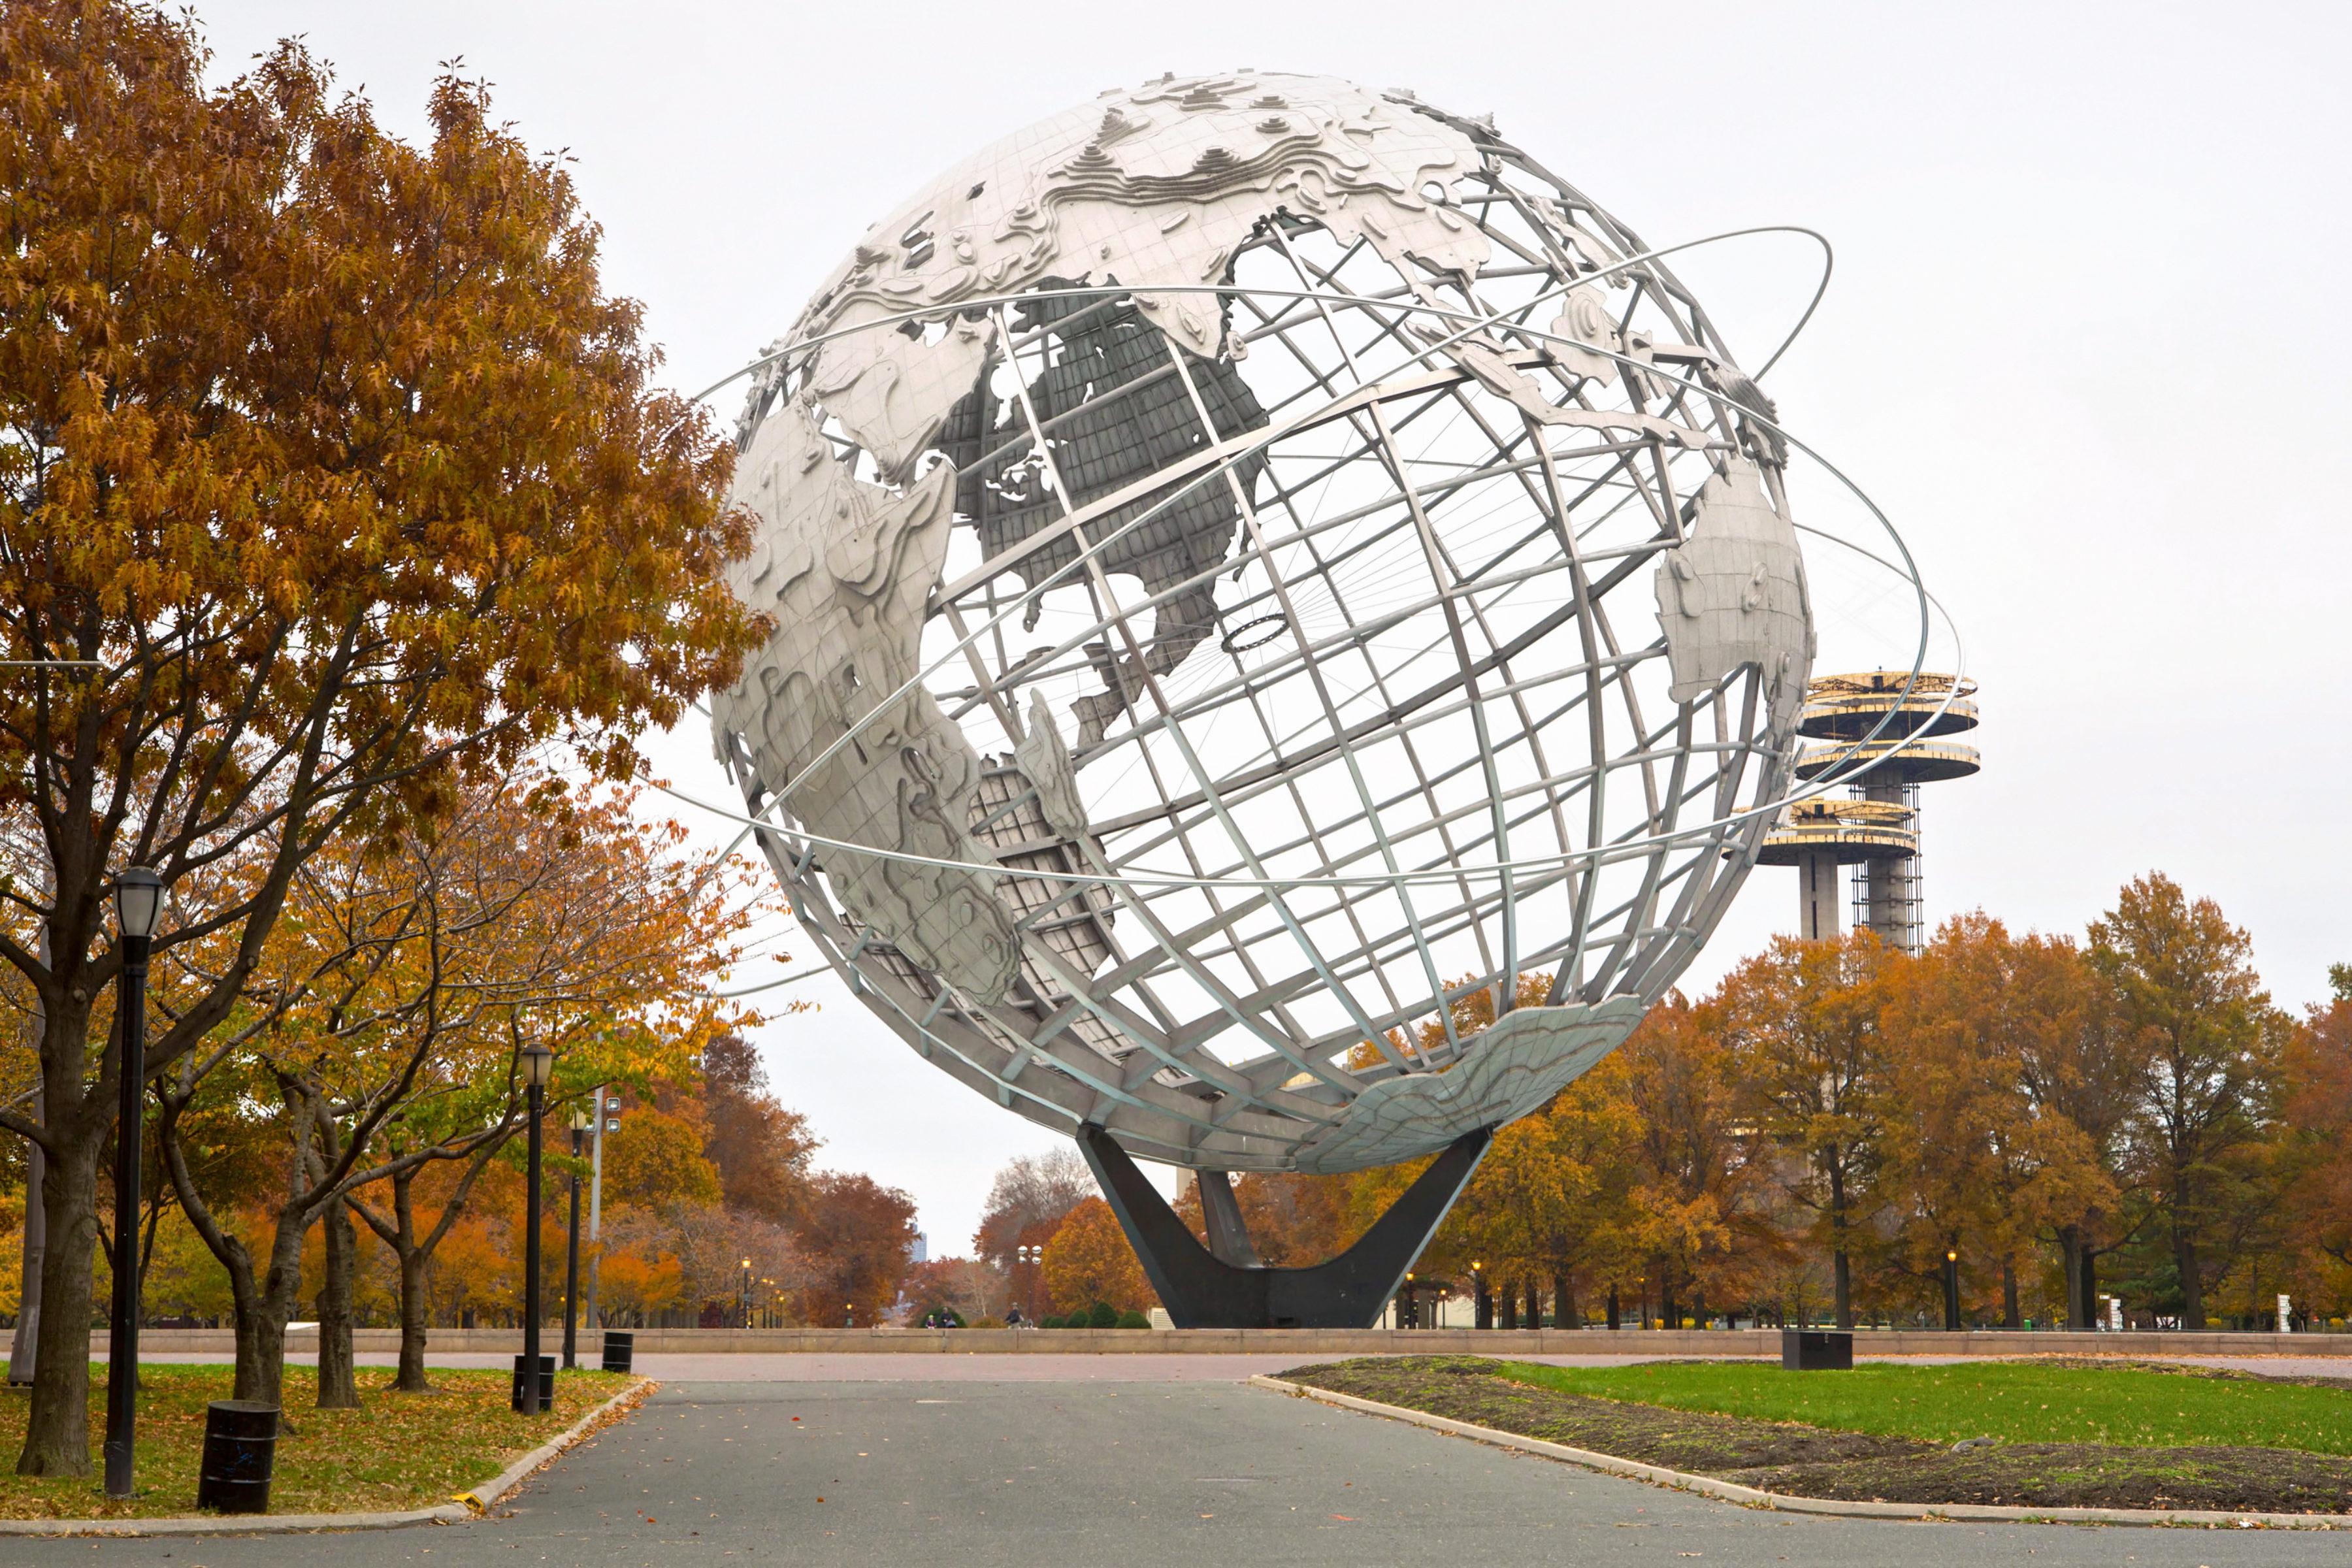 [Flushing Meadows Corona Park](/attractions/flushing-meadows-corona-park), the largest park in Queens, is home to this enduring symbol of the 1964 World’s Fair and the borough’s diversity.